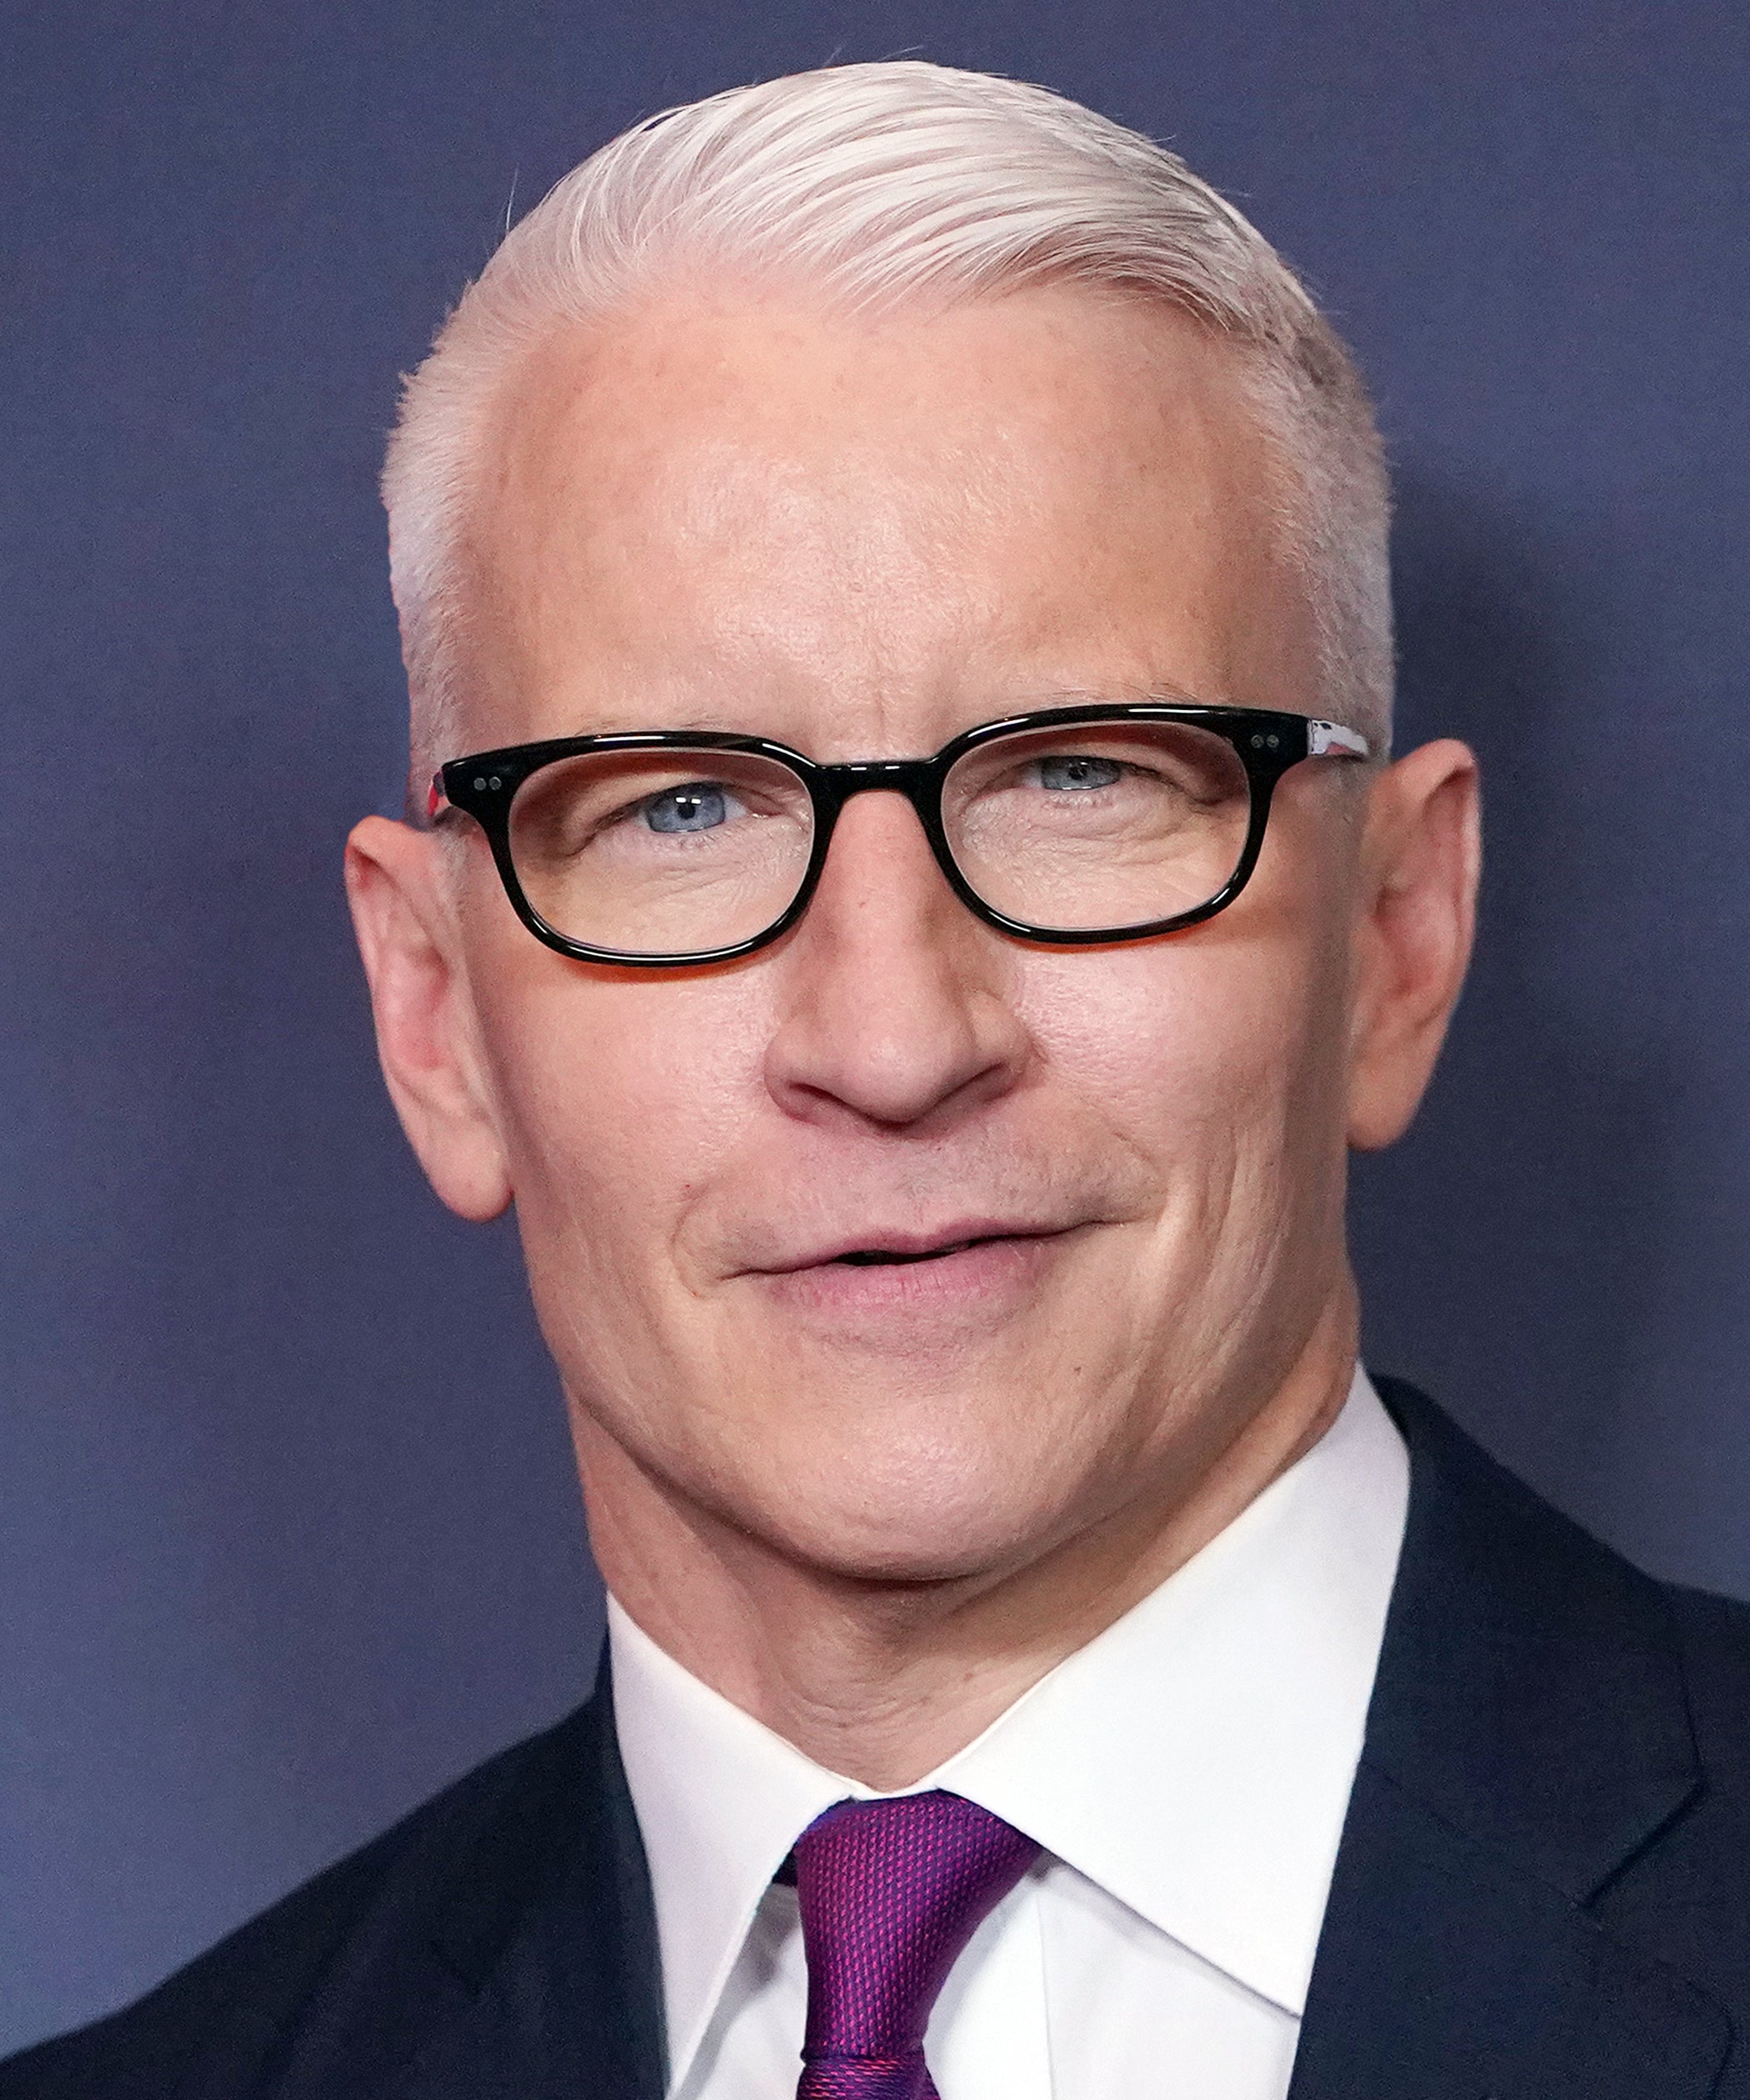 Celebs Who Look Even Better With Gray Hair, From Anderson Cooper to Steve  Carell